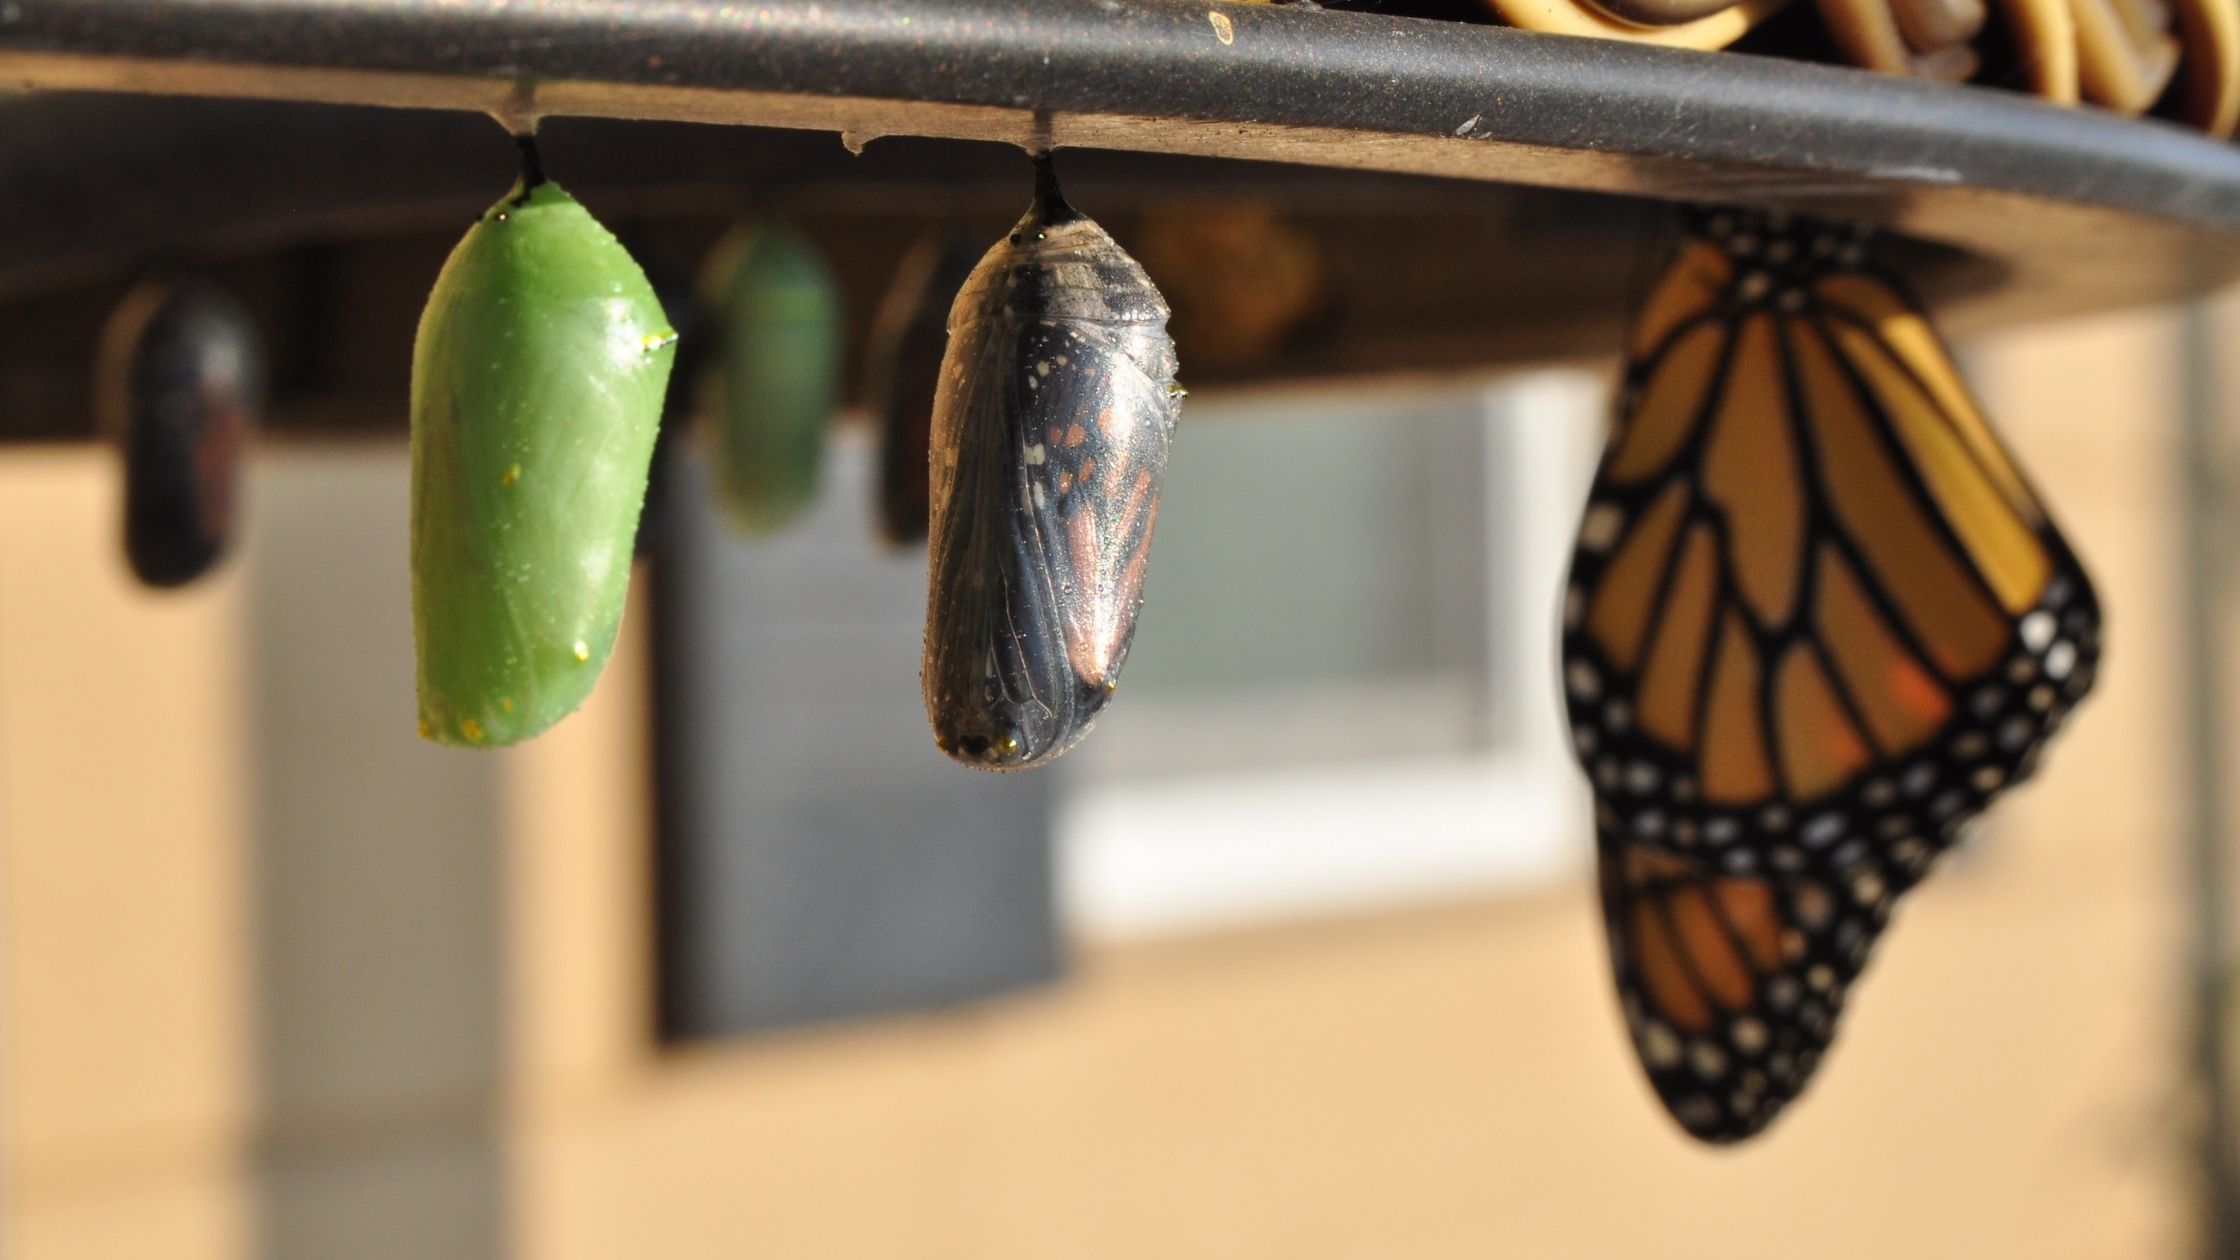 The life cycle of a butterfly is shown in real life stages.